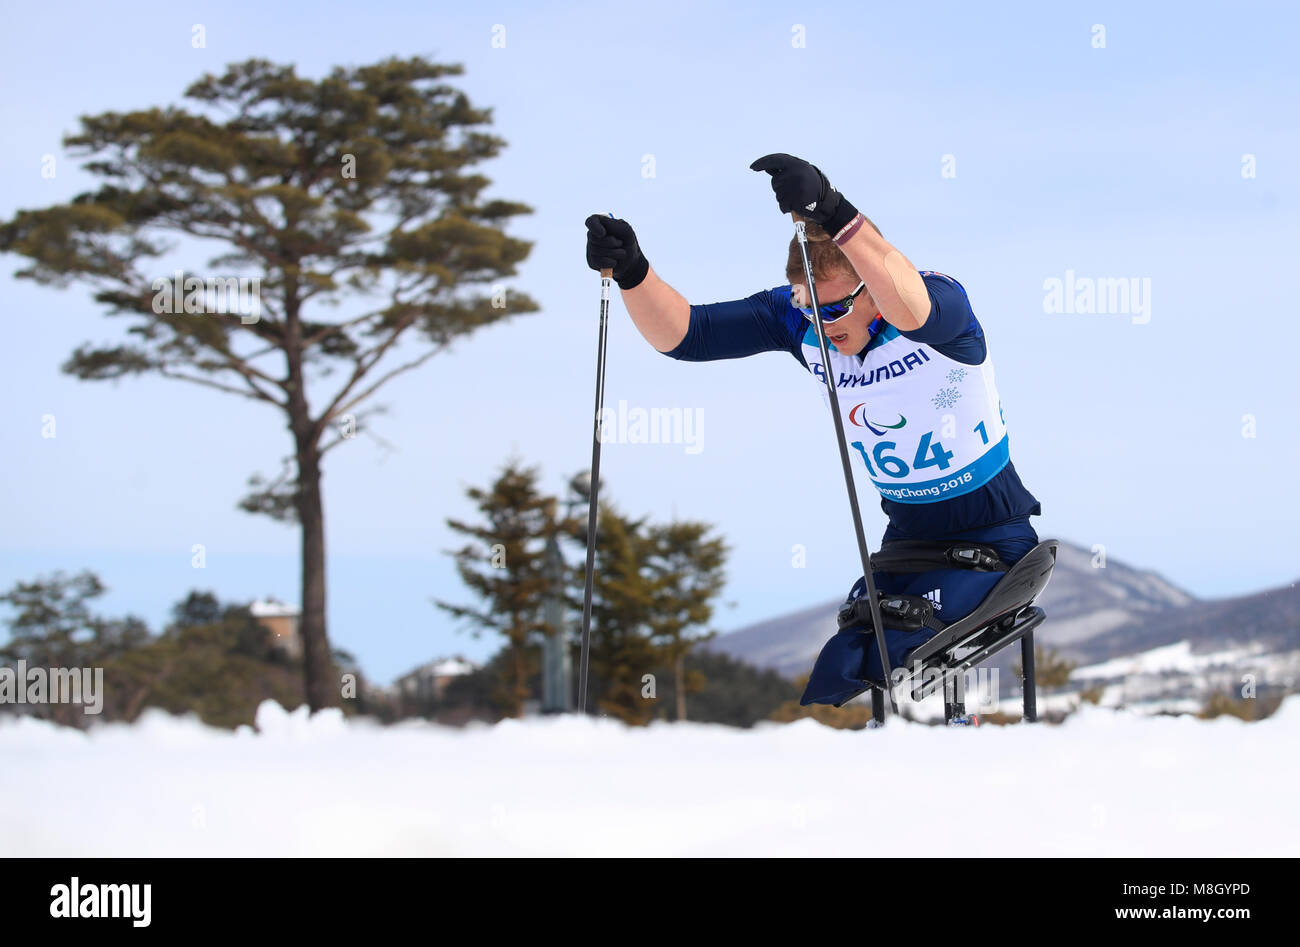 Great Britain's Scott Meenagh competes in the Men's 7.5km, Sitting Cross Country Skiing, at the Alpensia Cross Country Centre during day eight of the PyeongChang 2018 Winter Paralympics in South Korea. Stock Photo